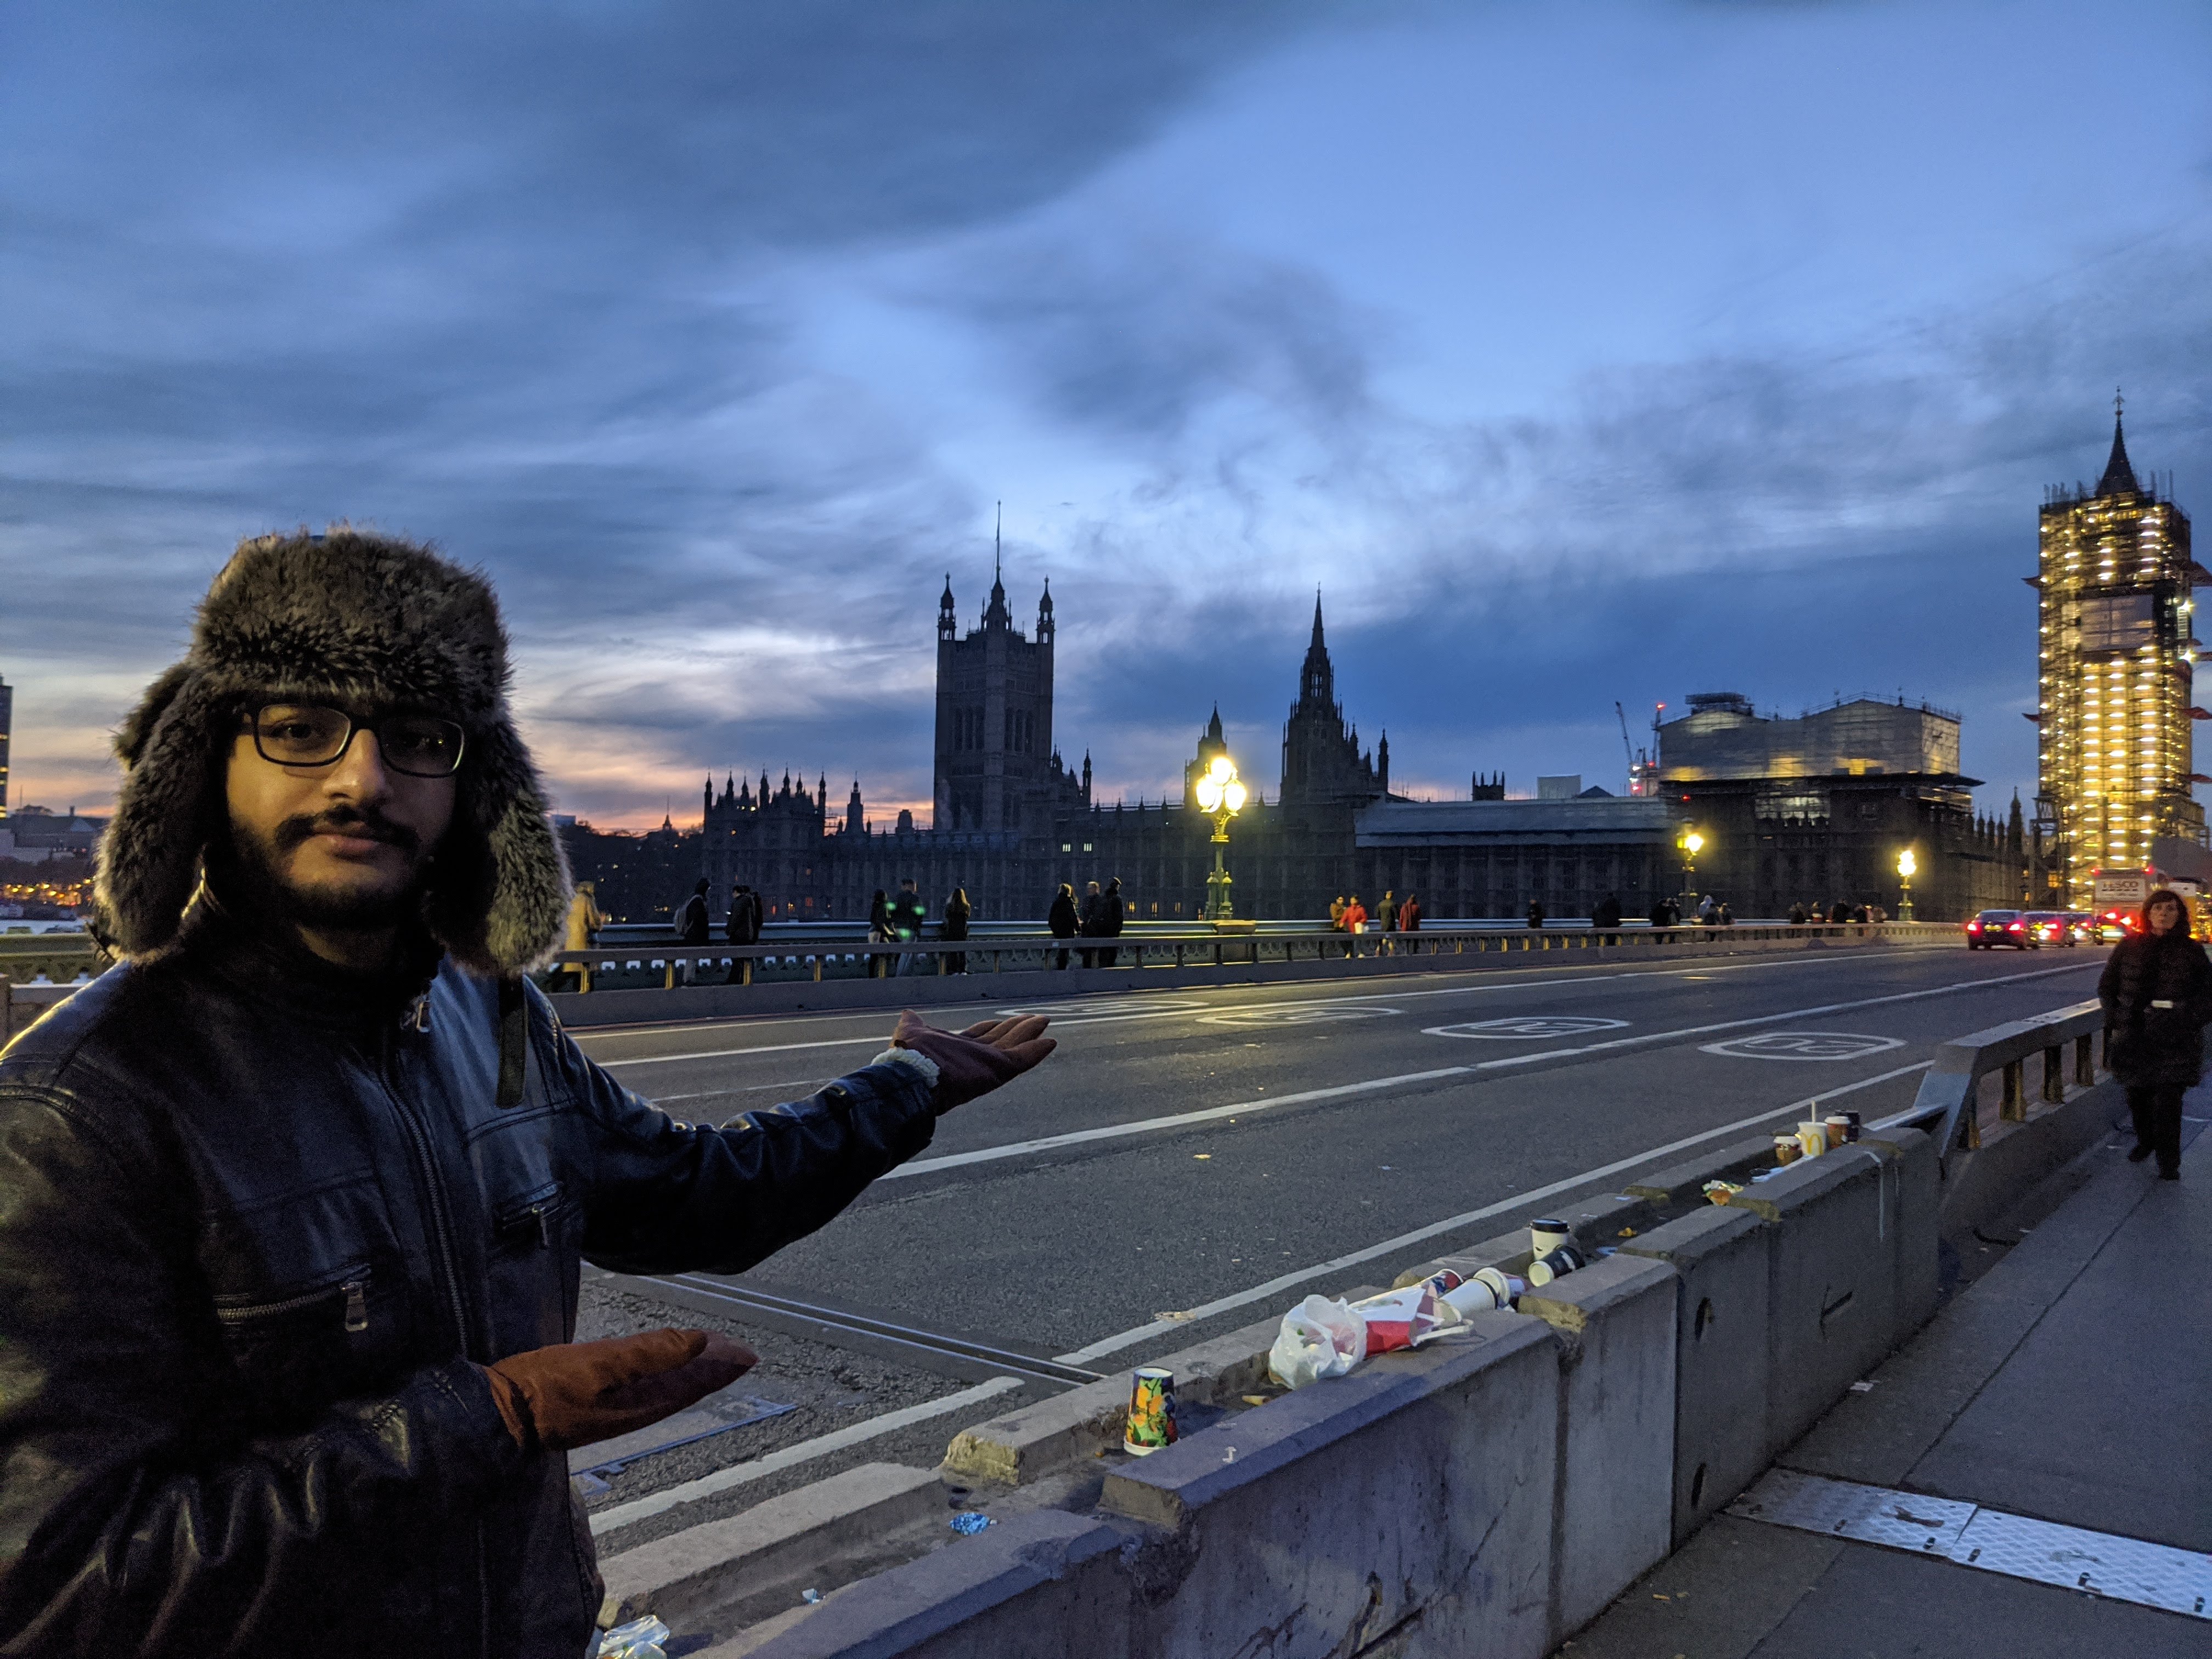 Me gesturing at the parliament building in London, October 2019